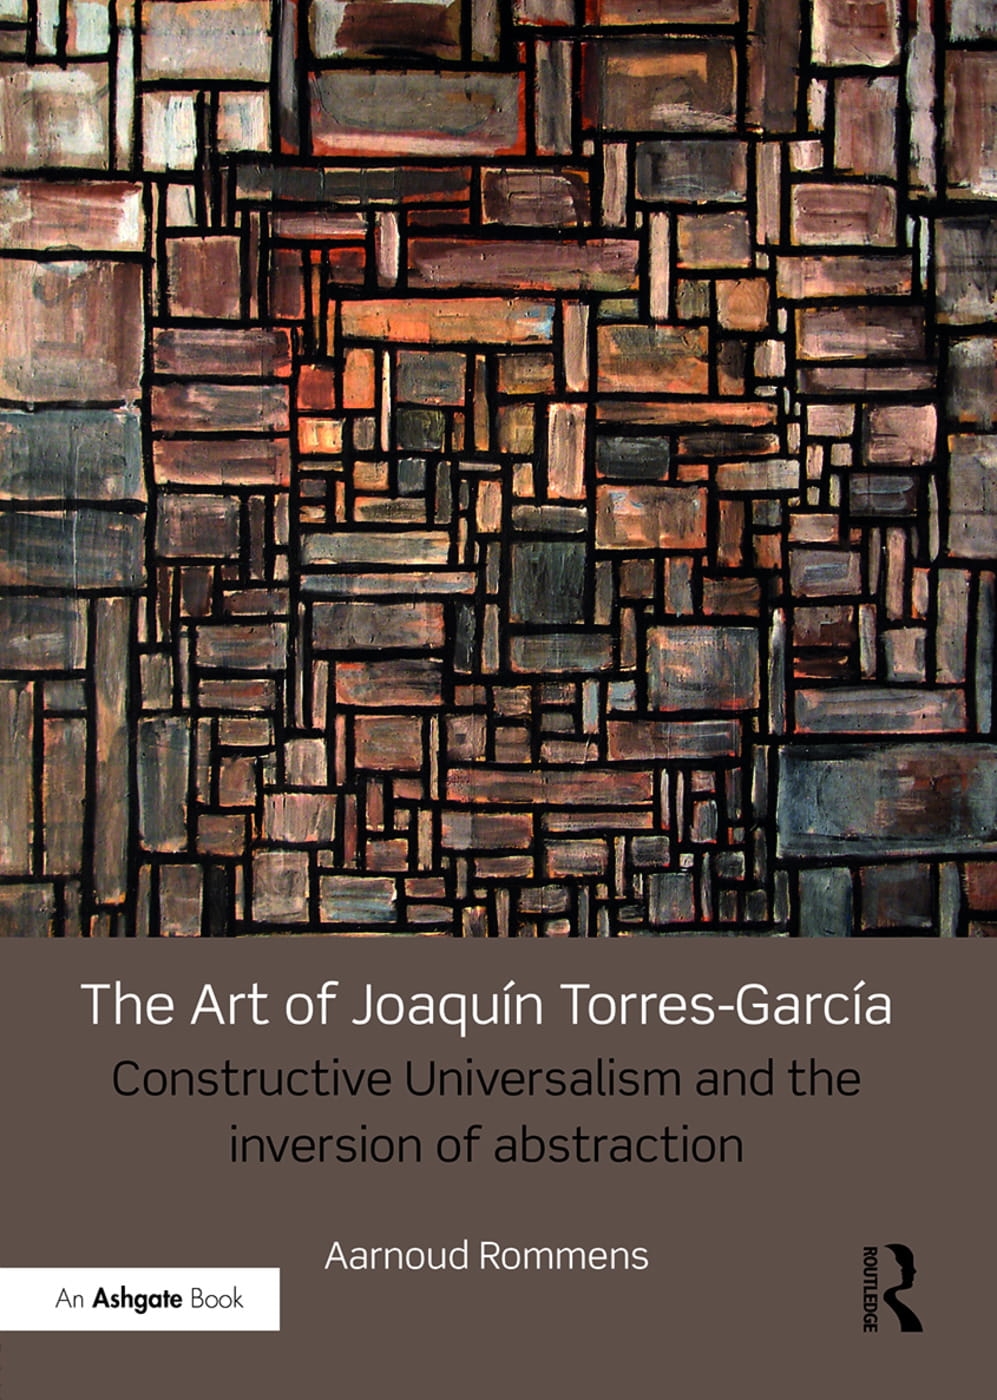 The Art of Joaquin Torres-Garcia: Constructive Universalism and the inversion of abstraction